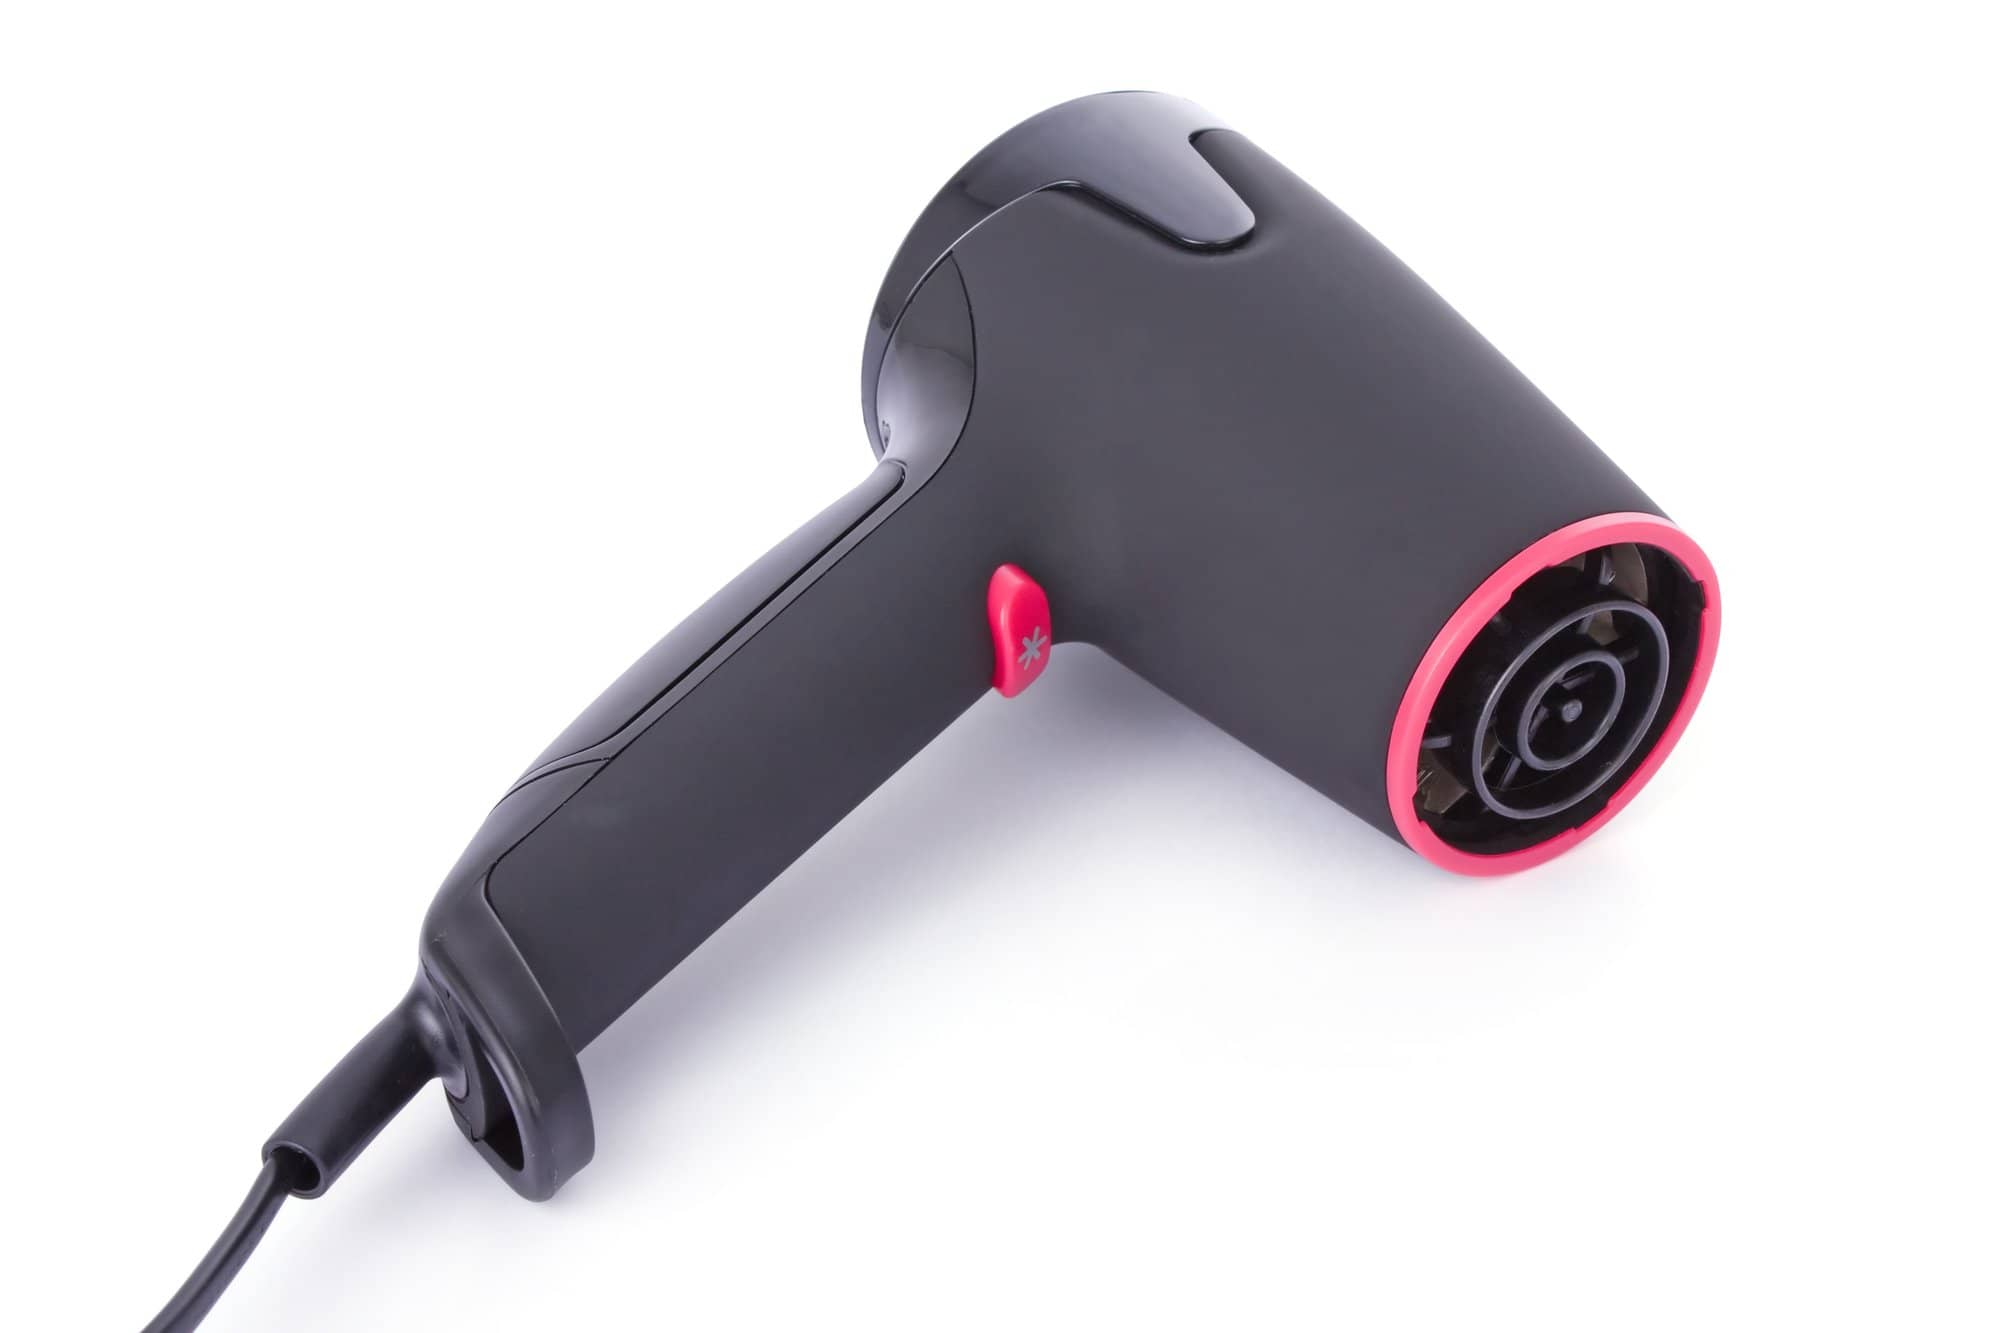 Article: Top 7 Best Travel Hair Dryers